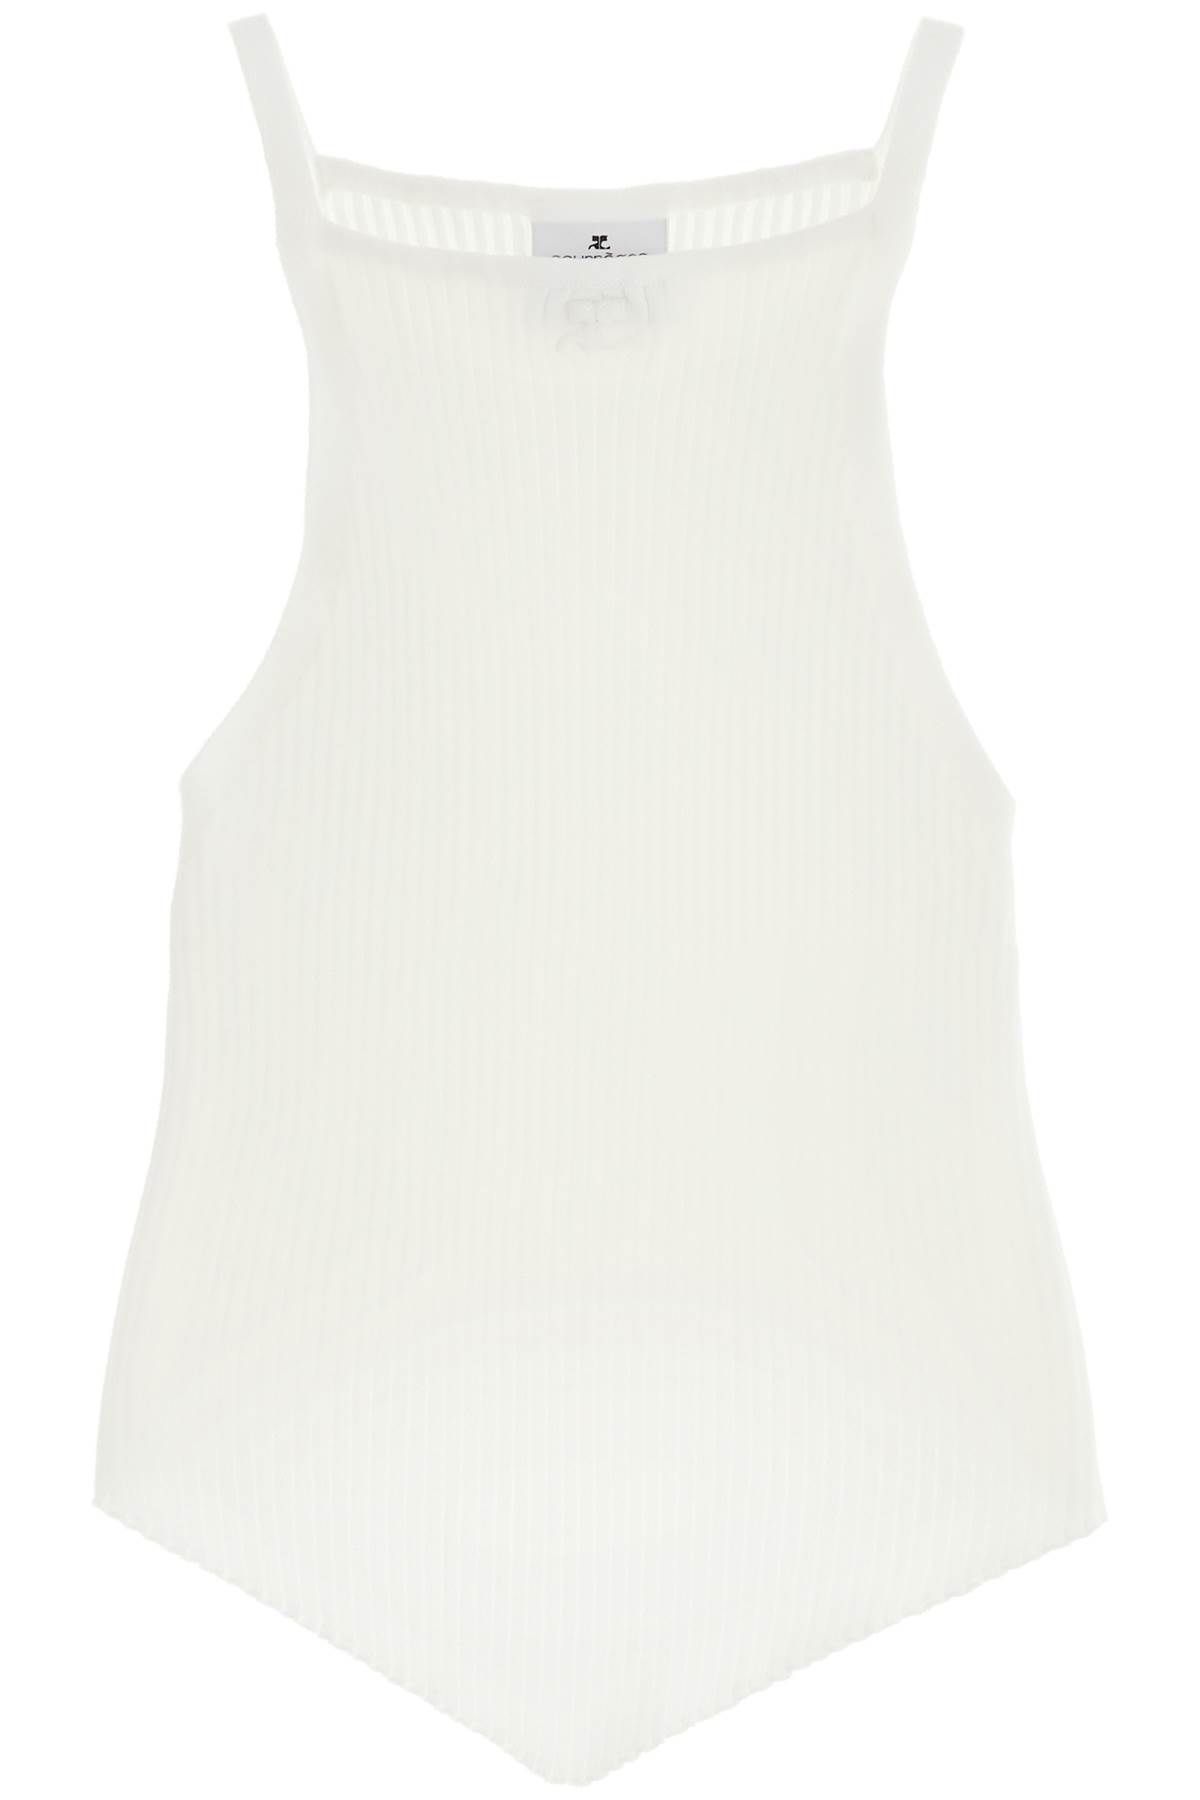 Courrèges COURREGES "ribbed knit tank top with pointed hem